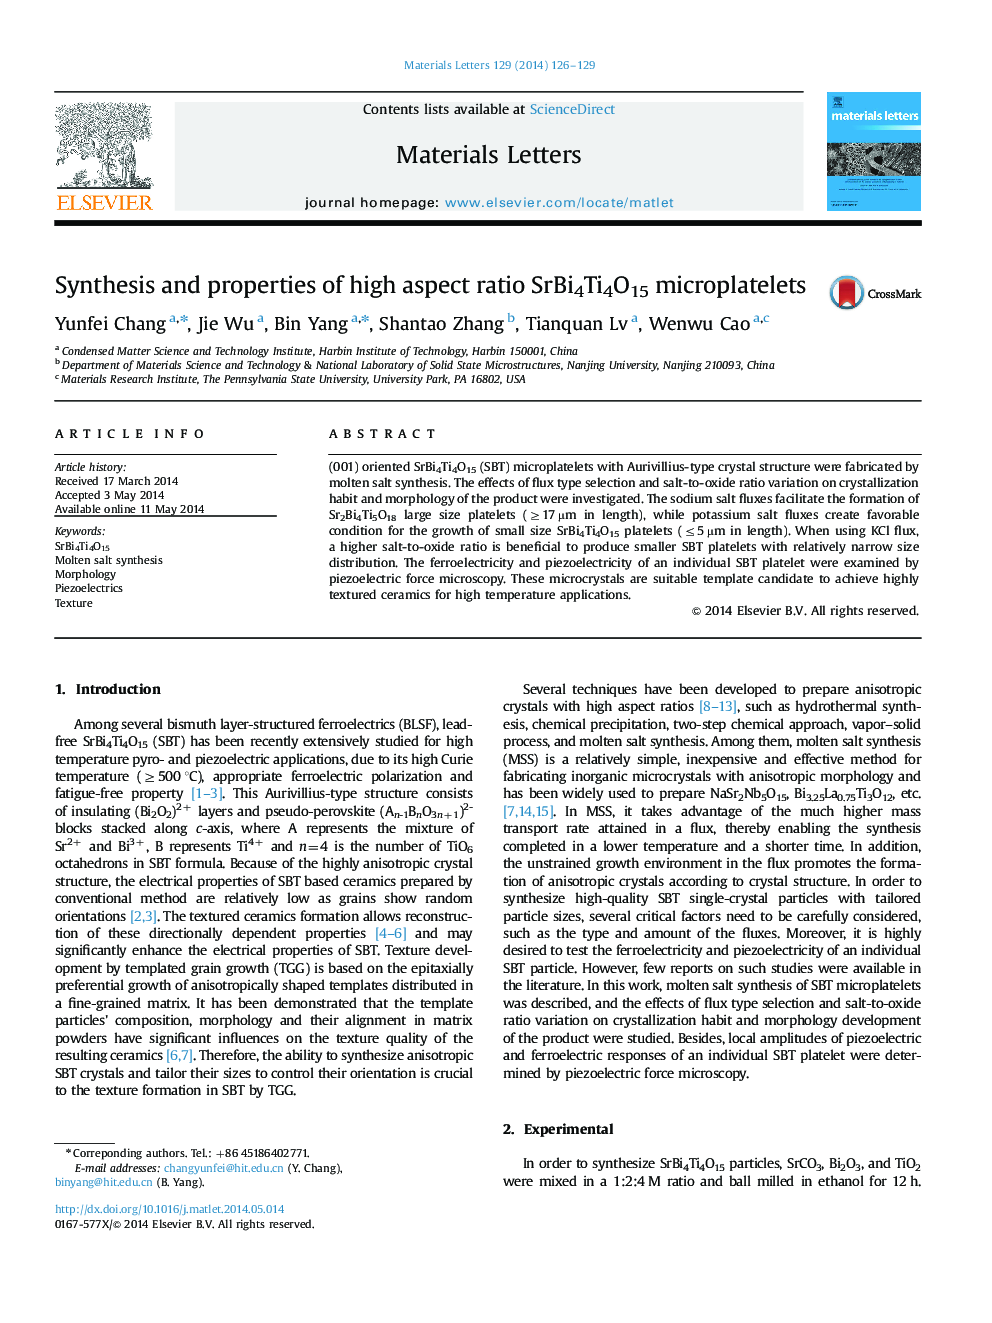 Synthesis and properties of high aspect ratio SrBi4Ti4O15 microplatelets